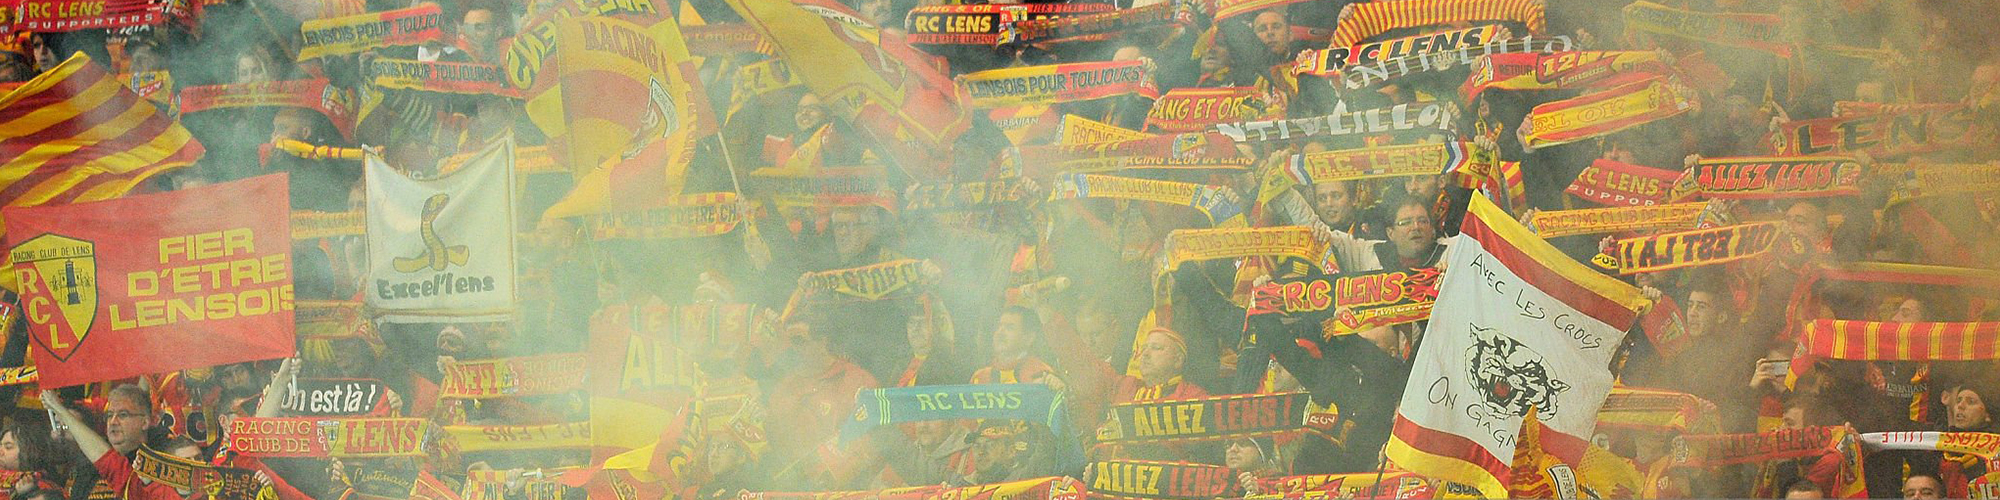 RC Lens Tickets & Experiences